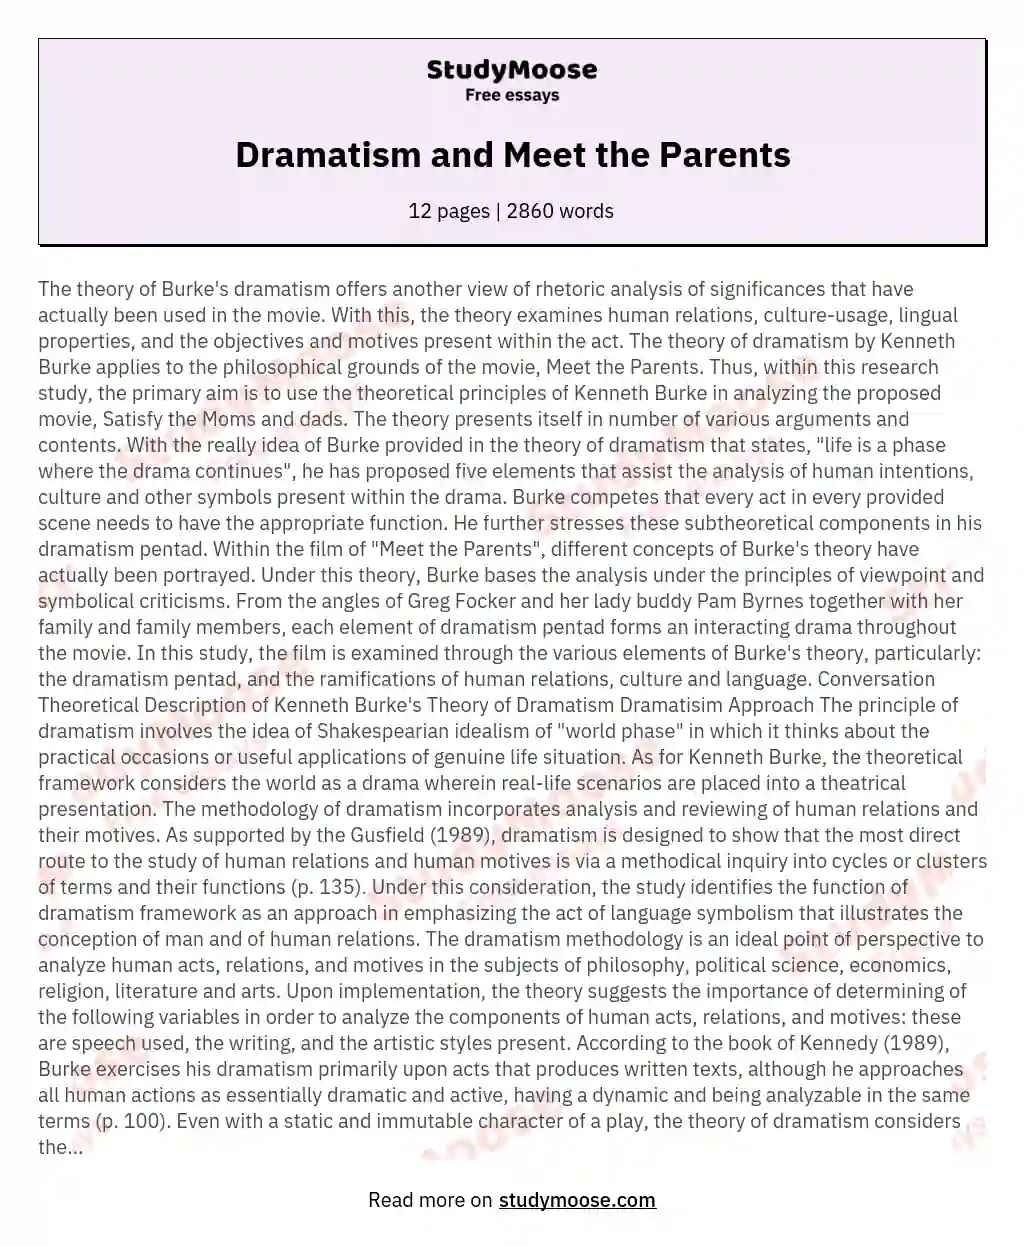 Dramatism and Meet the Parents essay